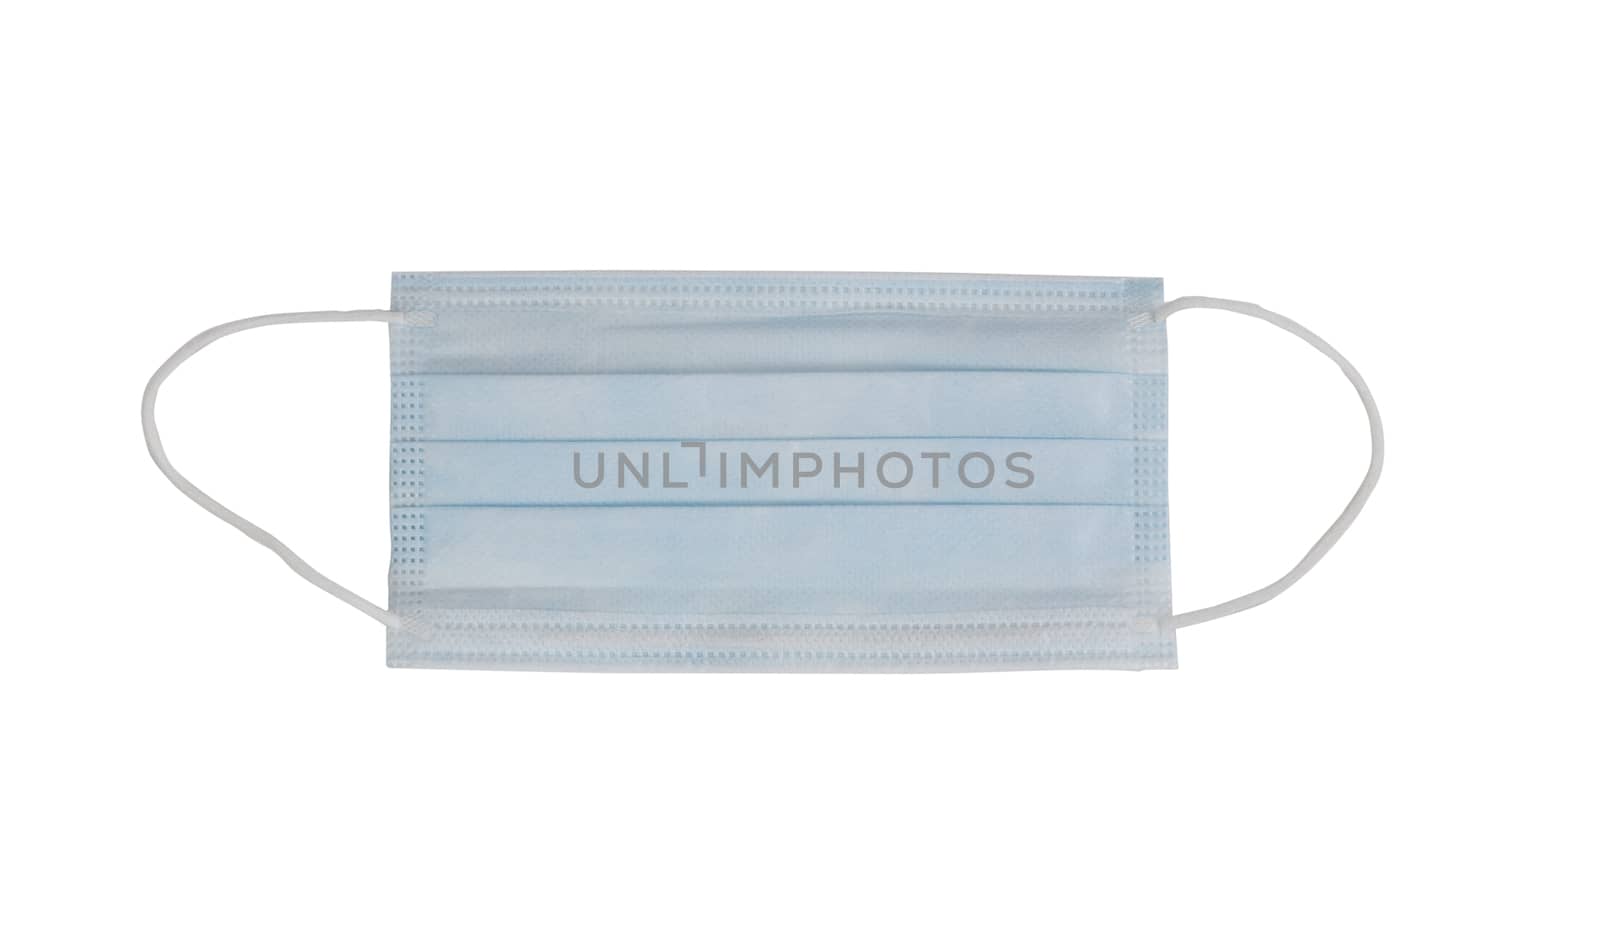 Medical mask for protection against the corona virus. Isolated on a pure white background 